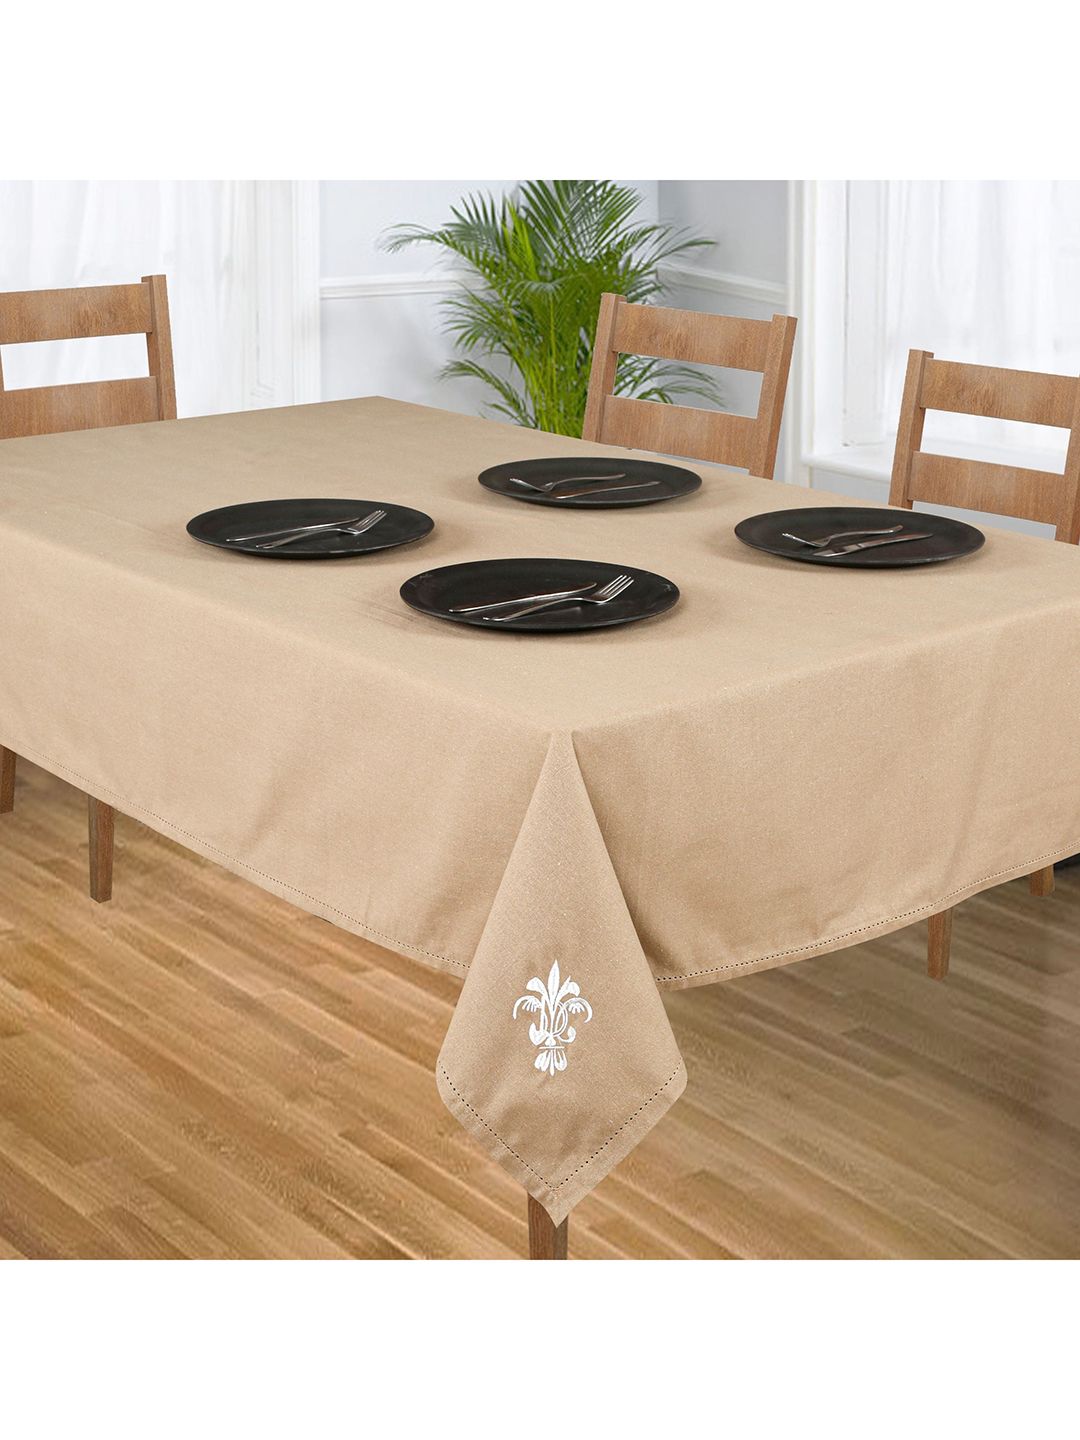 SHADES of LIFE Brown & White Patch Work Rectangle Cotton Table Cover Price in India